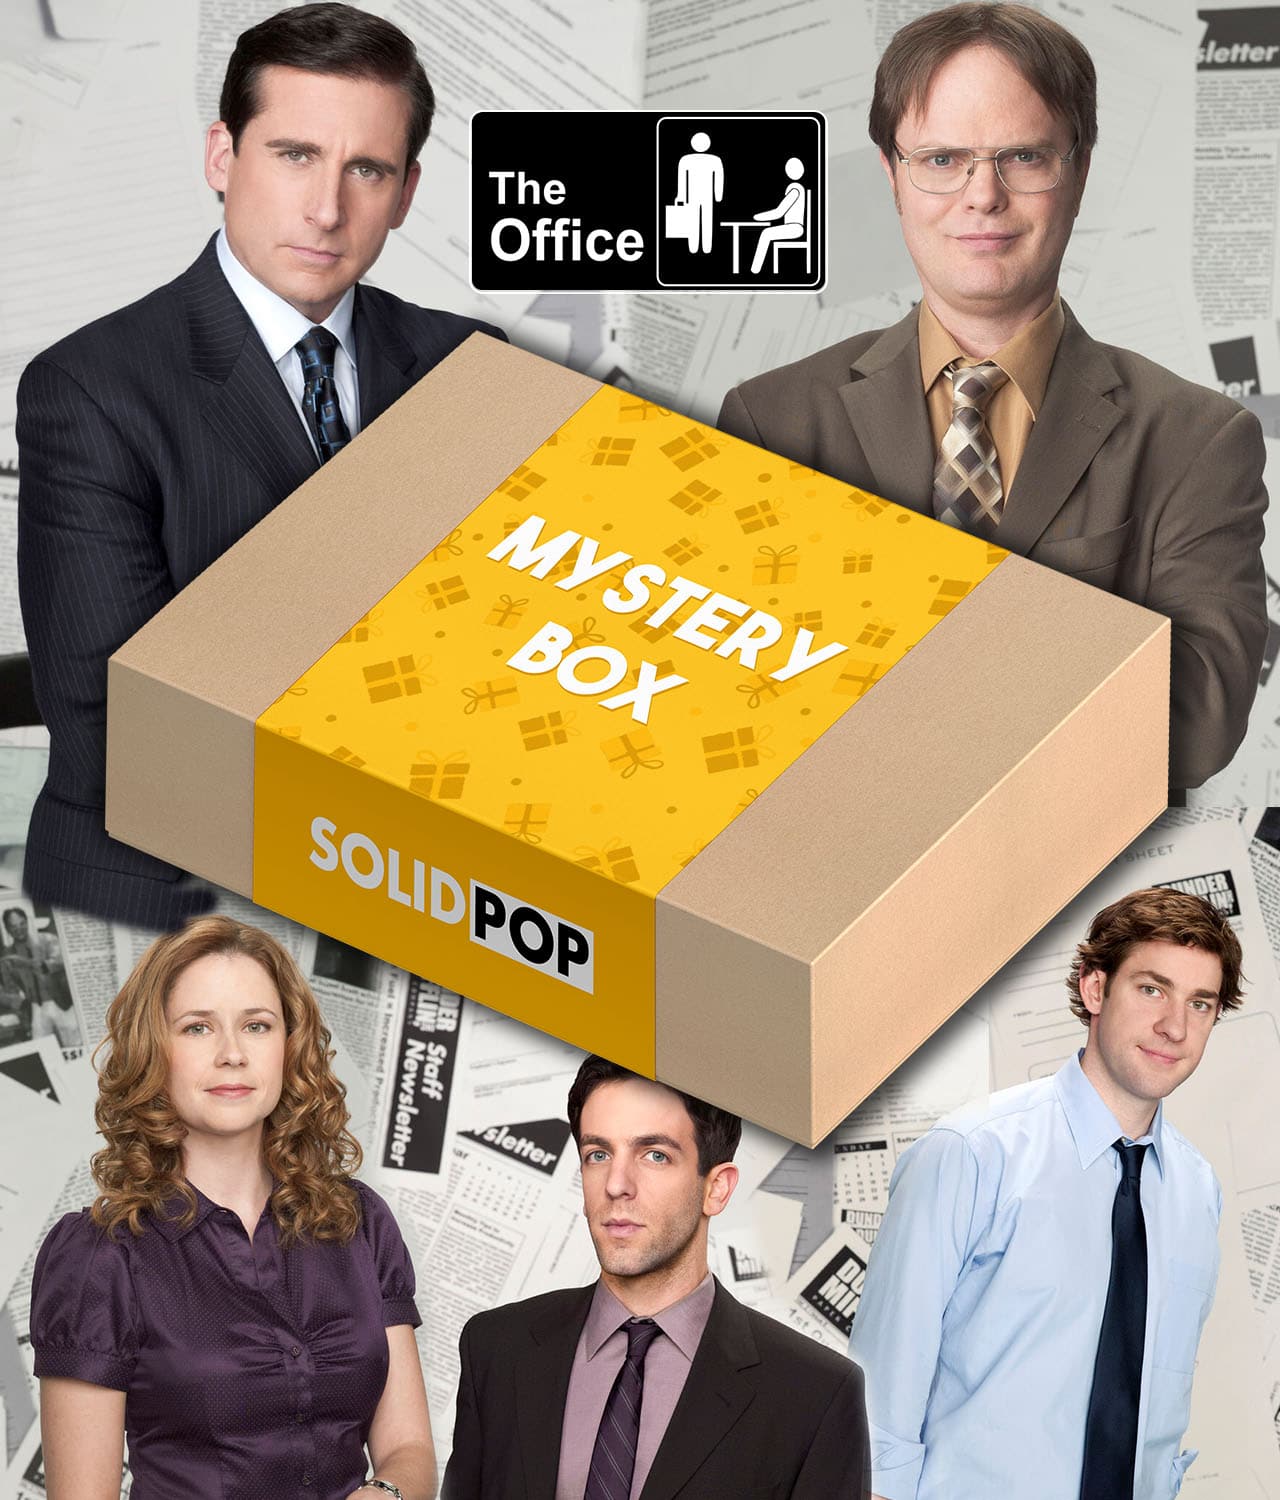 The Office Mystery Box